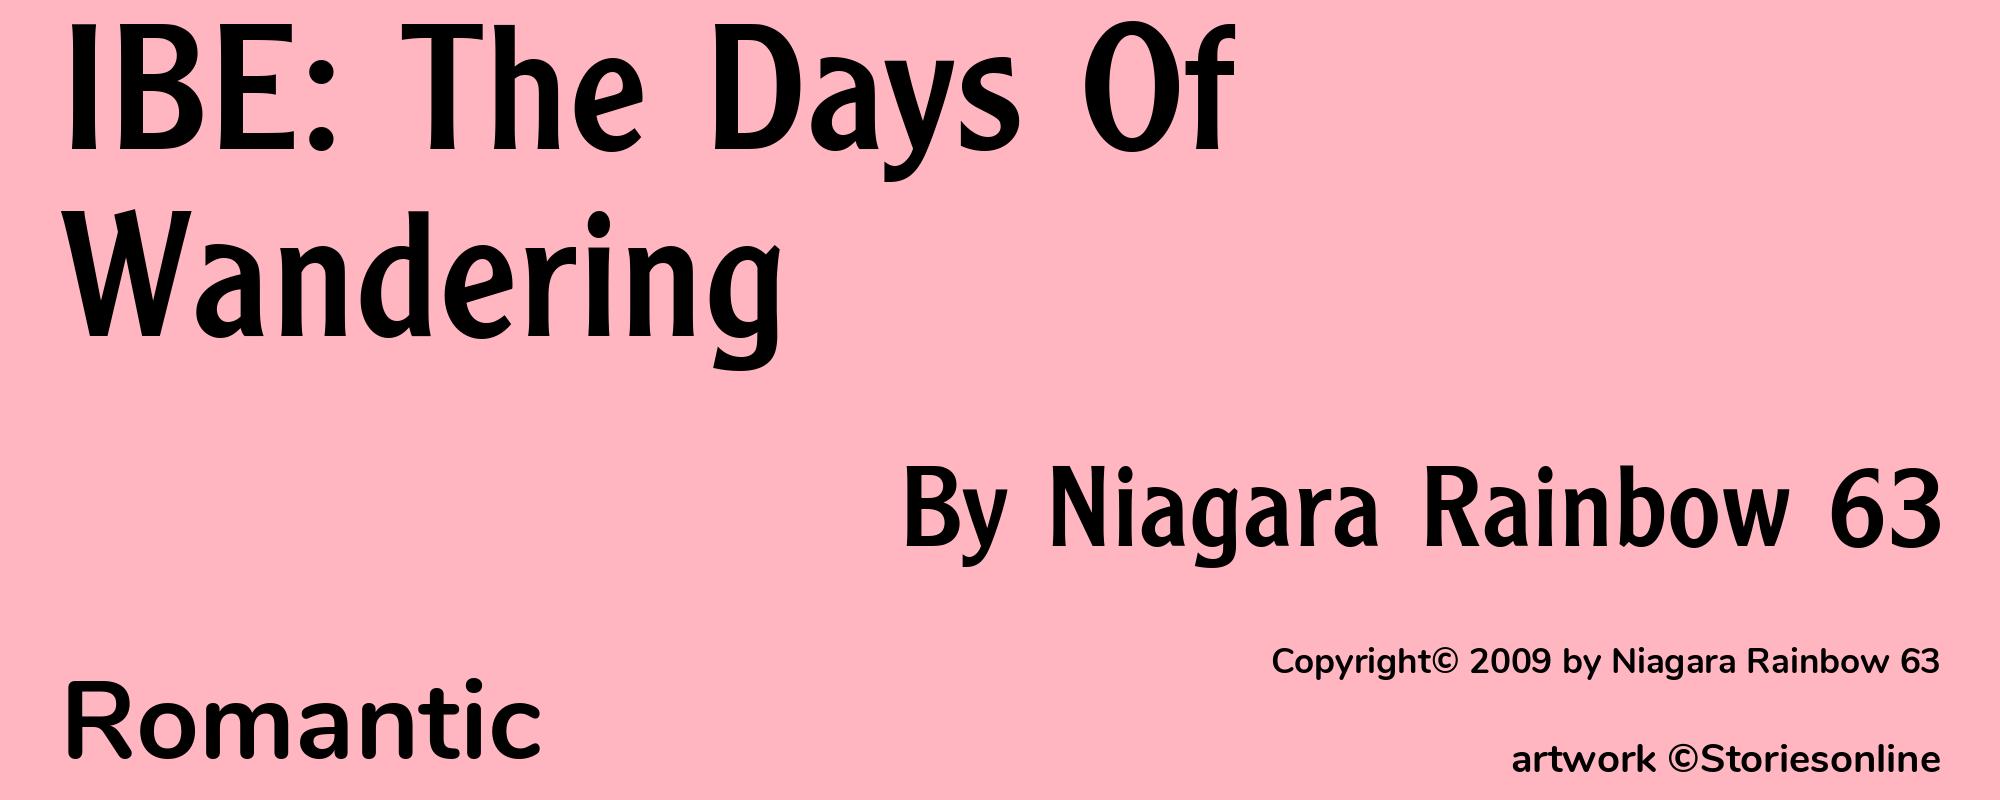 IBE: The Days Of Wandering - Cover